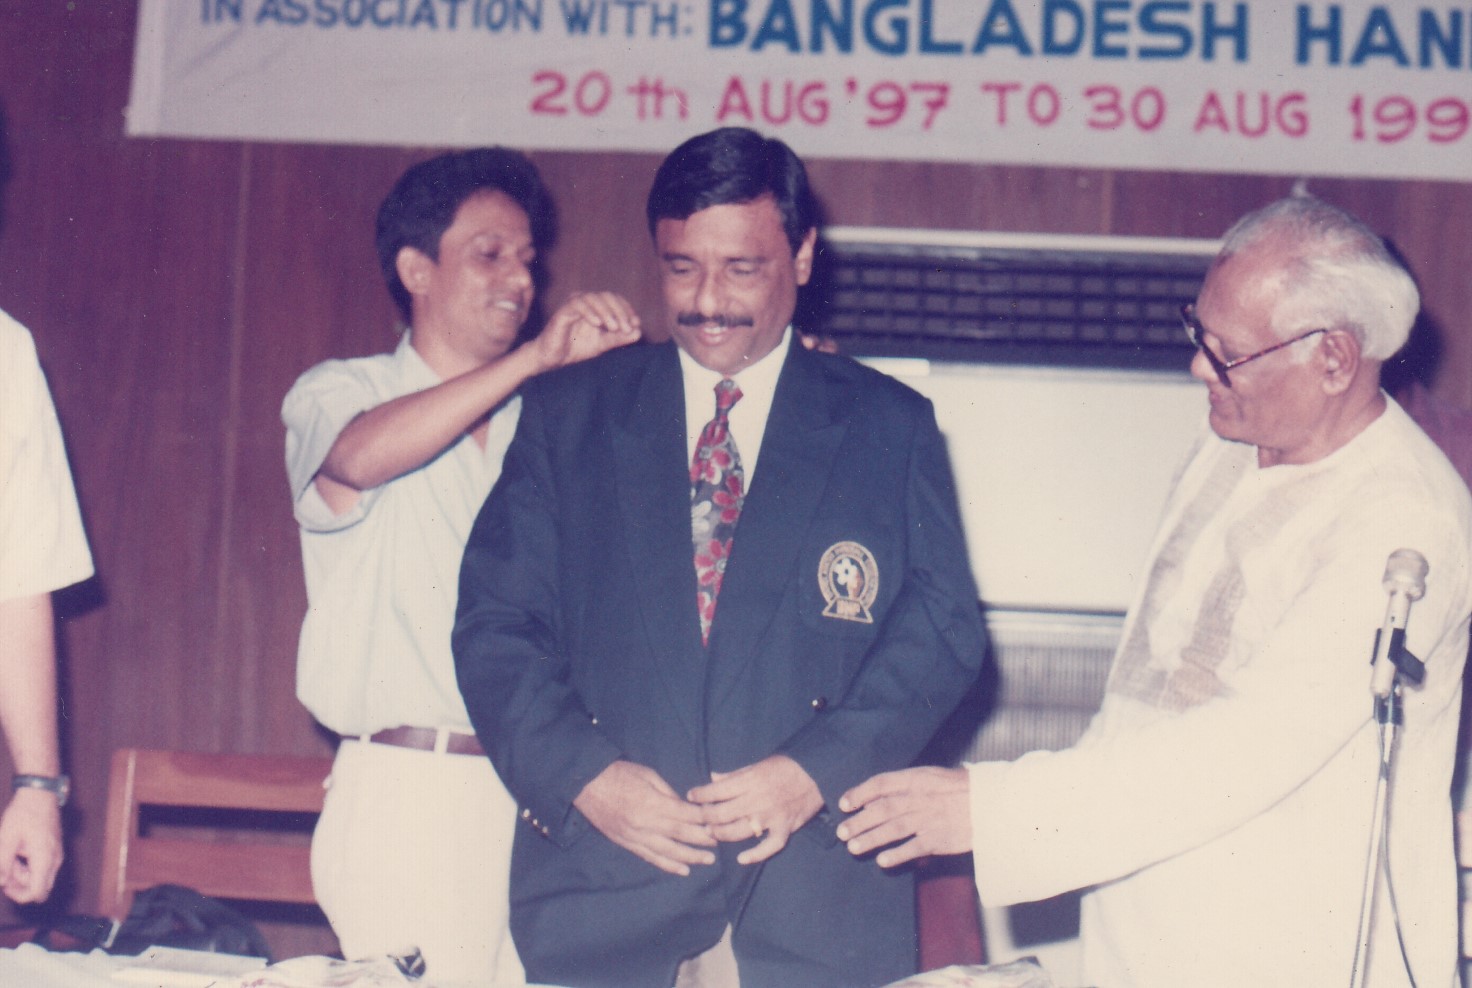 From left General Secretary Asaduzzaman Kohinoor, former Sports Minister Obaidul Quader, Founder President Col. MA Hamid